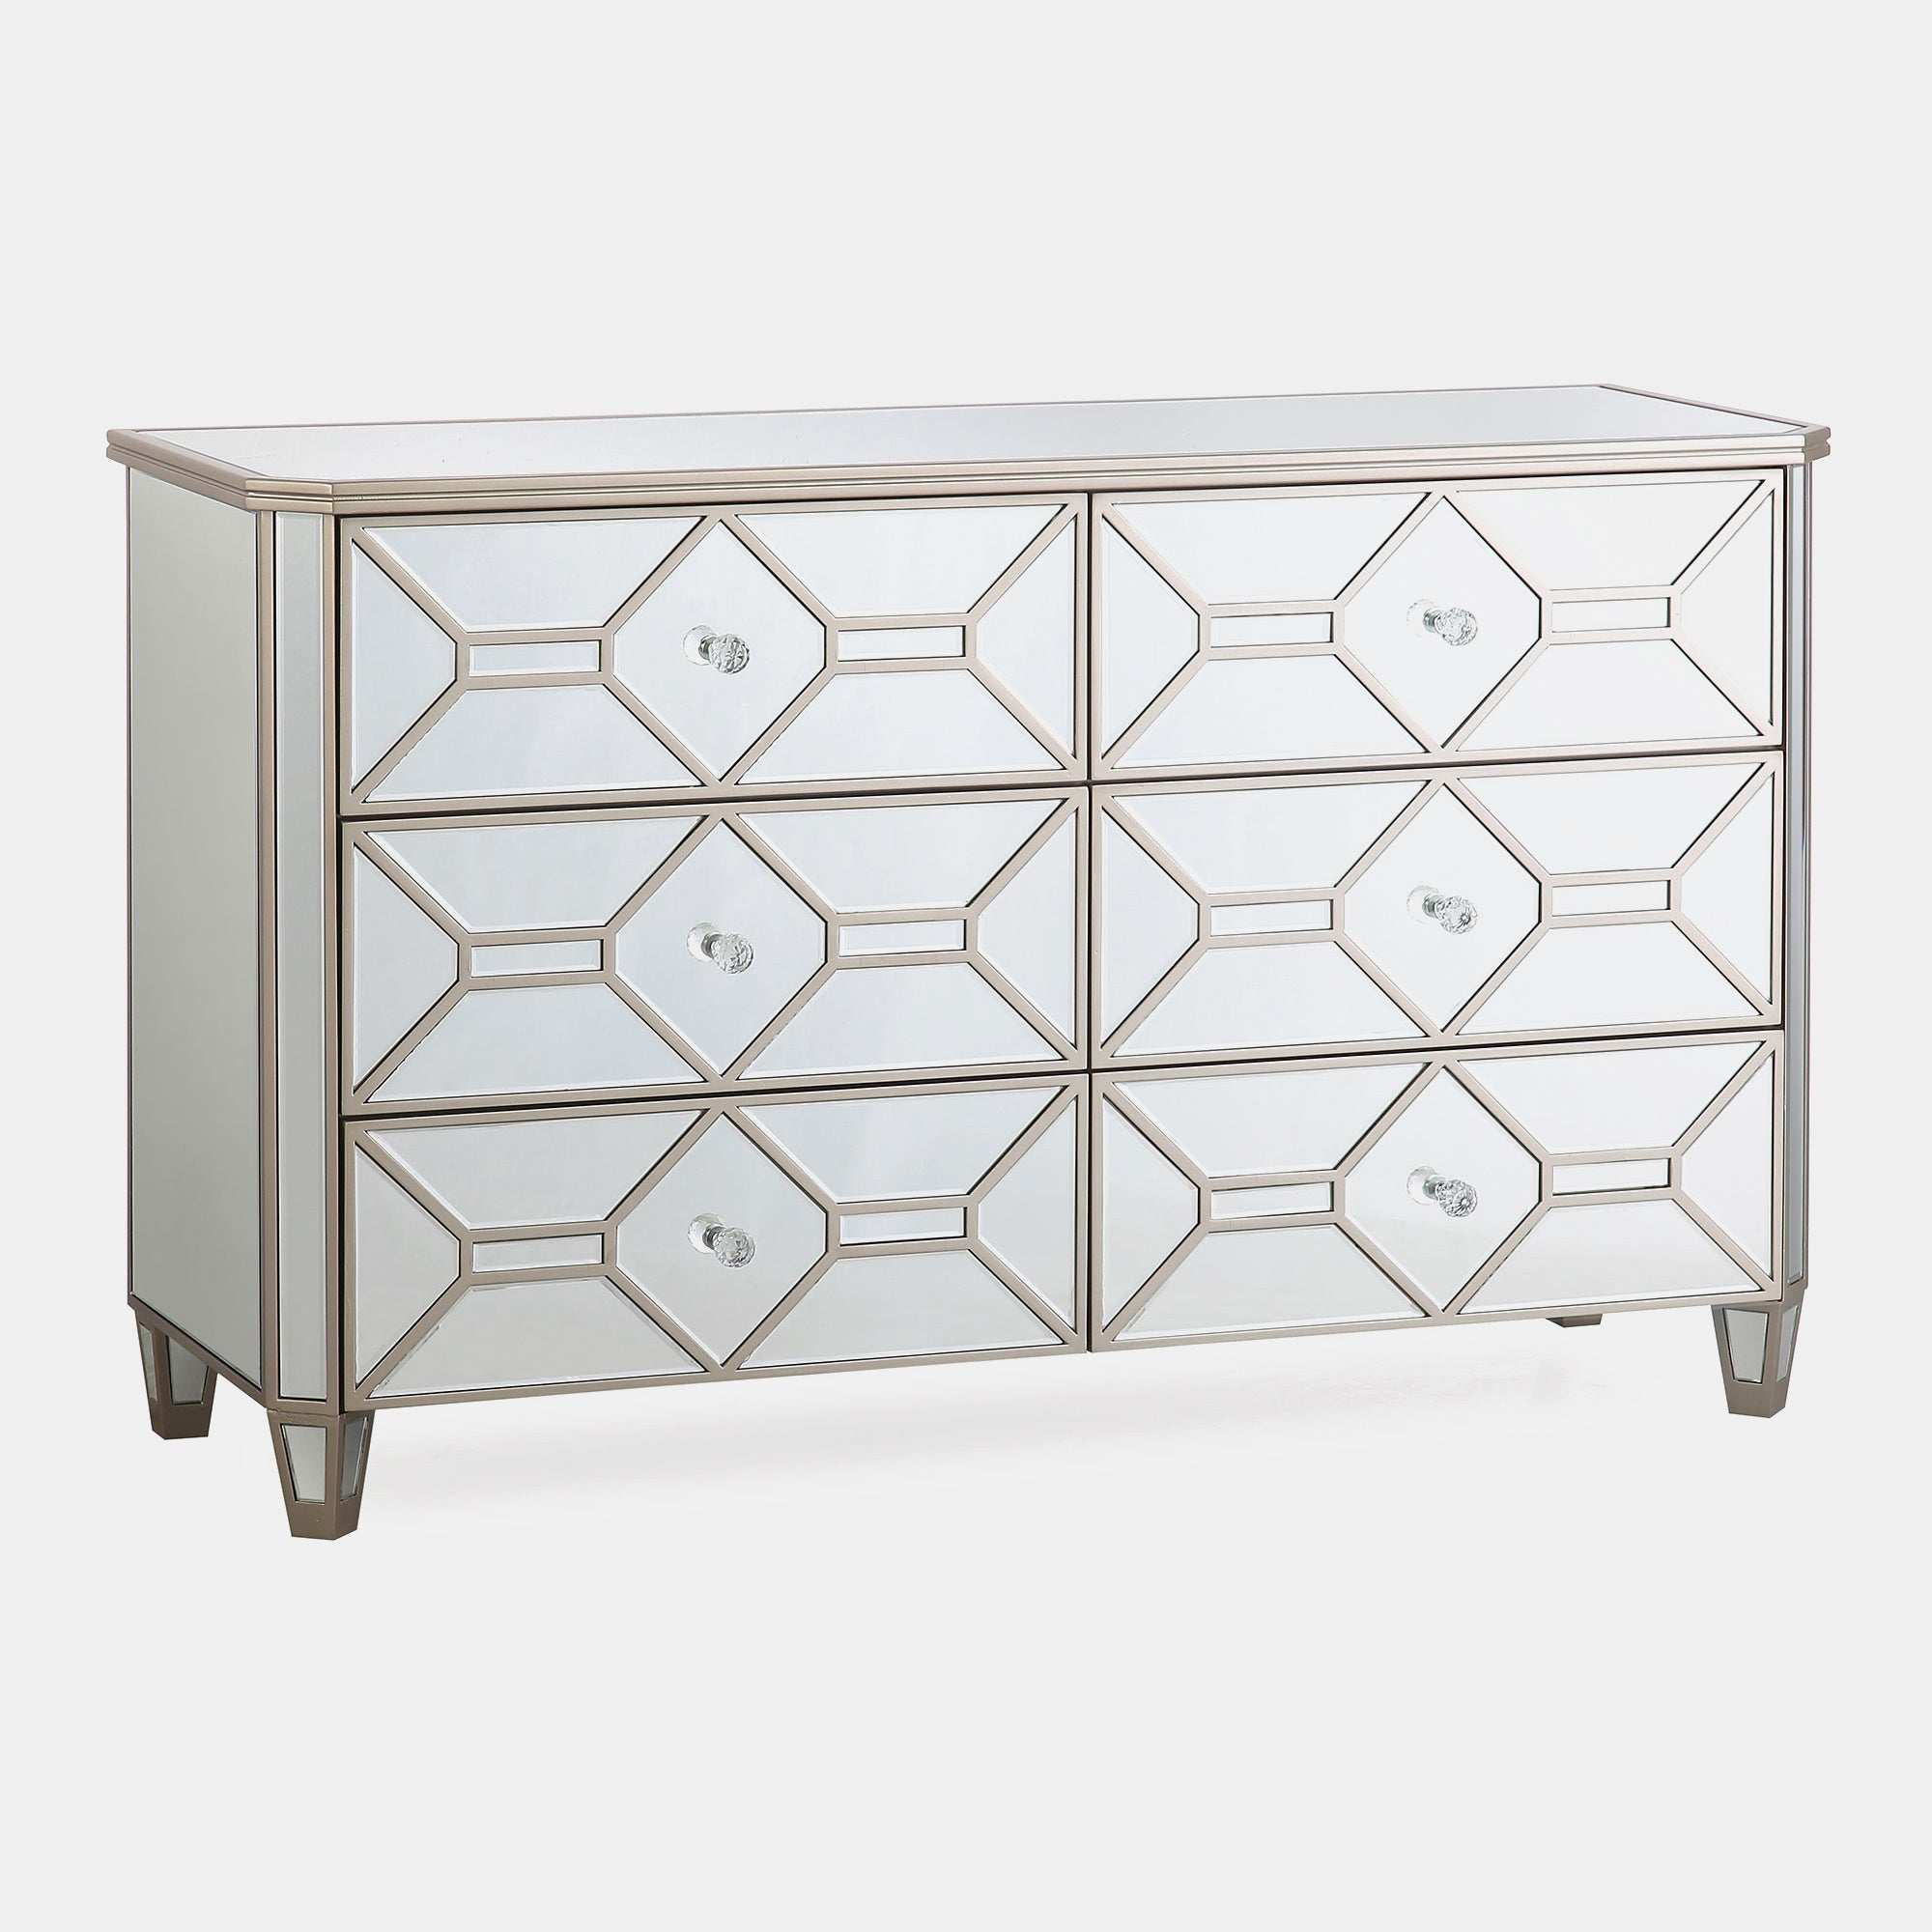 Ruby - 6 Drawer Mirrored Wide Chest